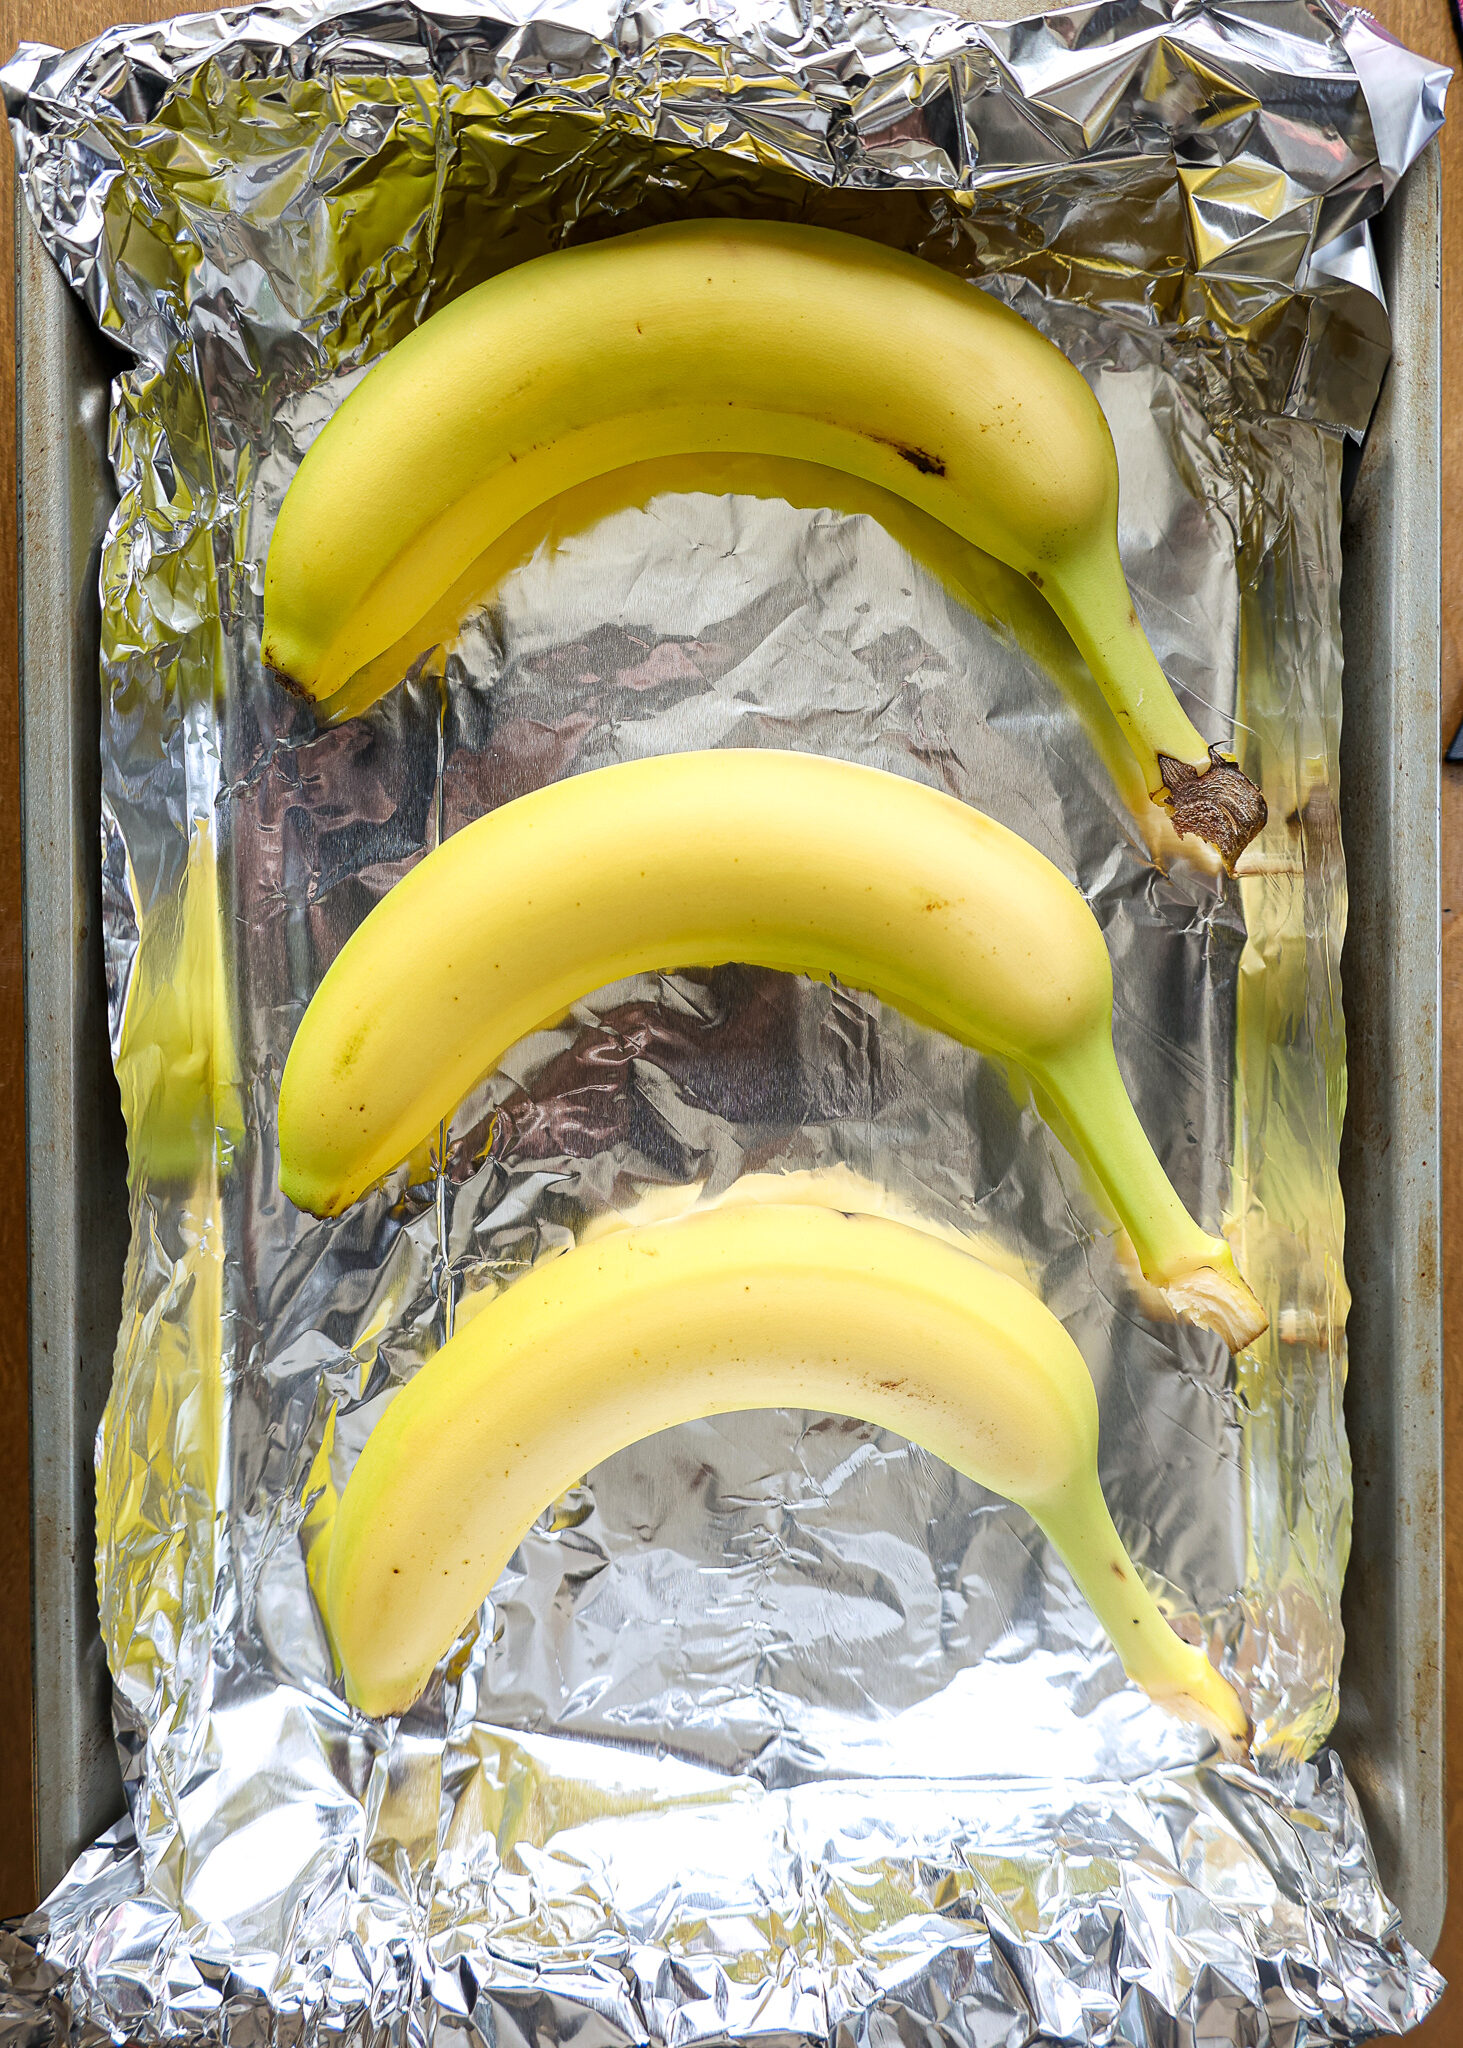 image of unripe bananas that have been placed on a foil lined baking sheet to be quickly ripened in the oven